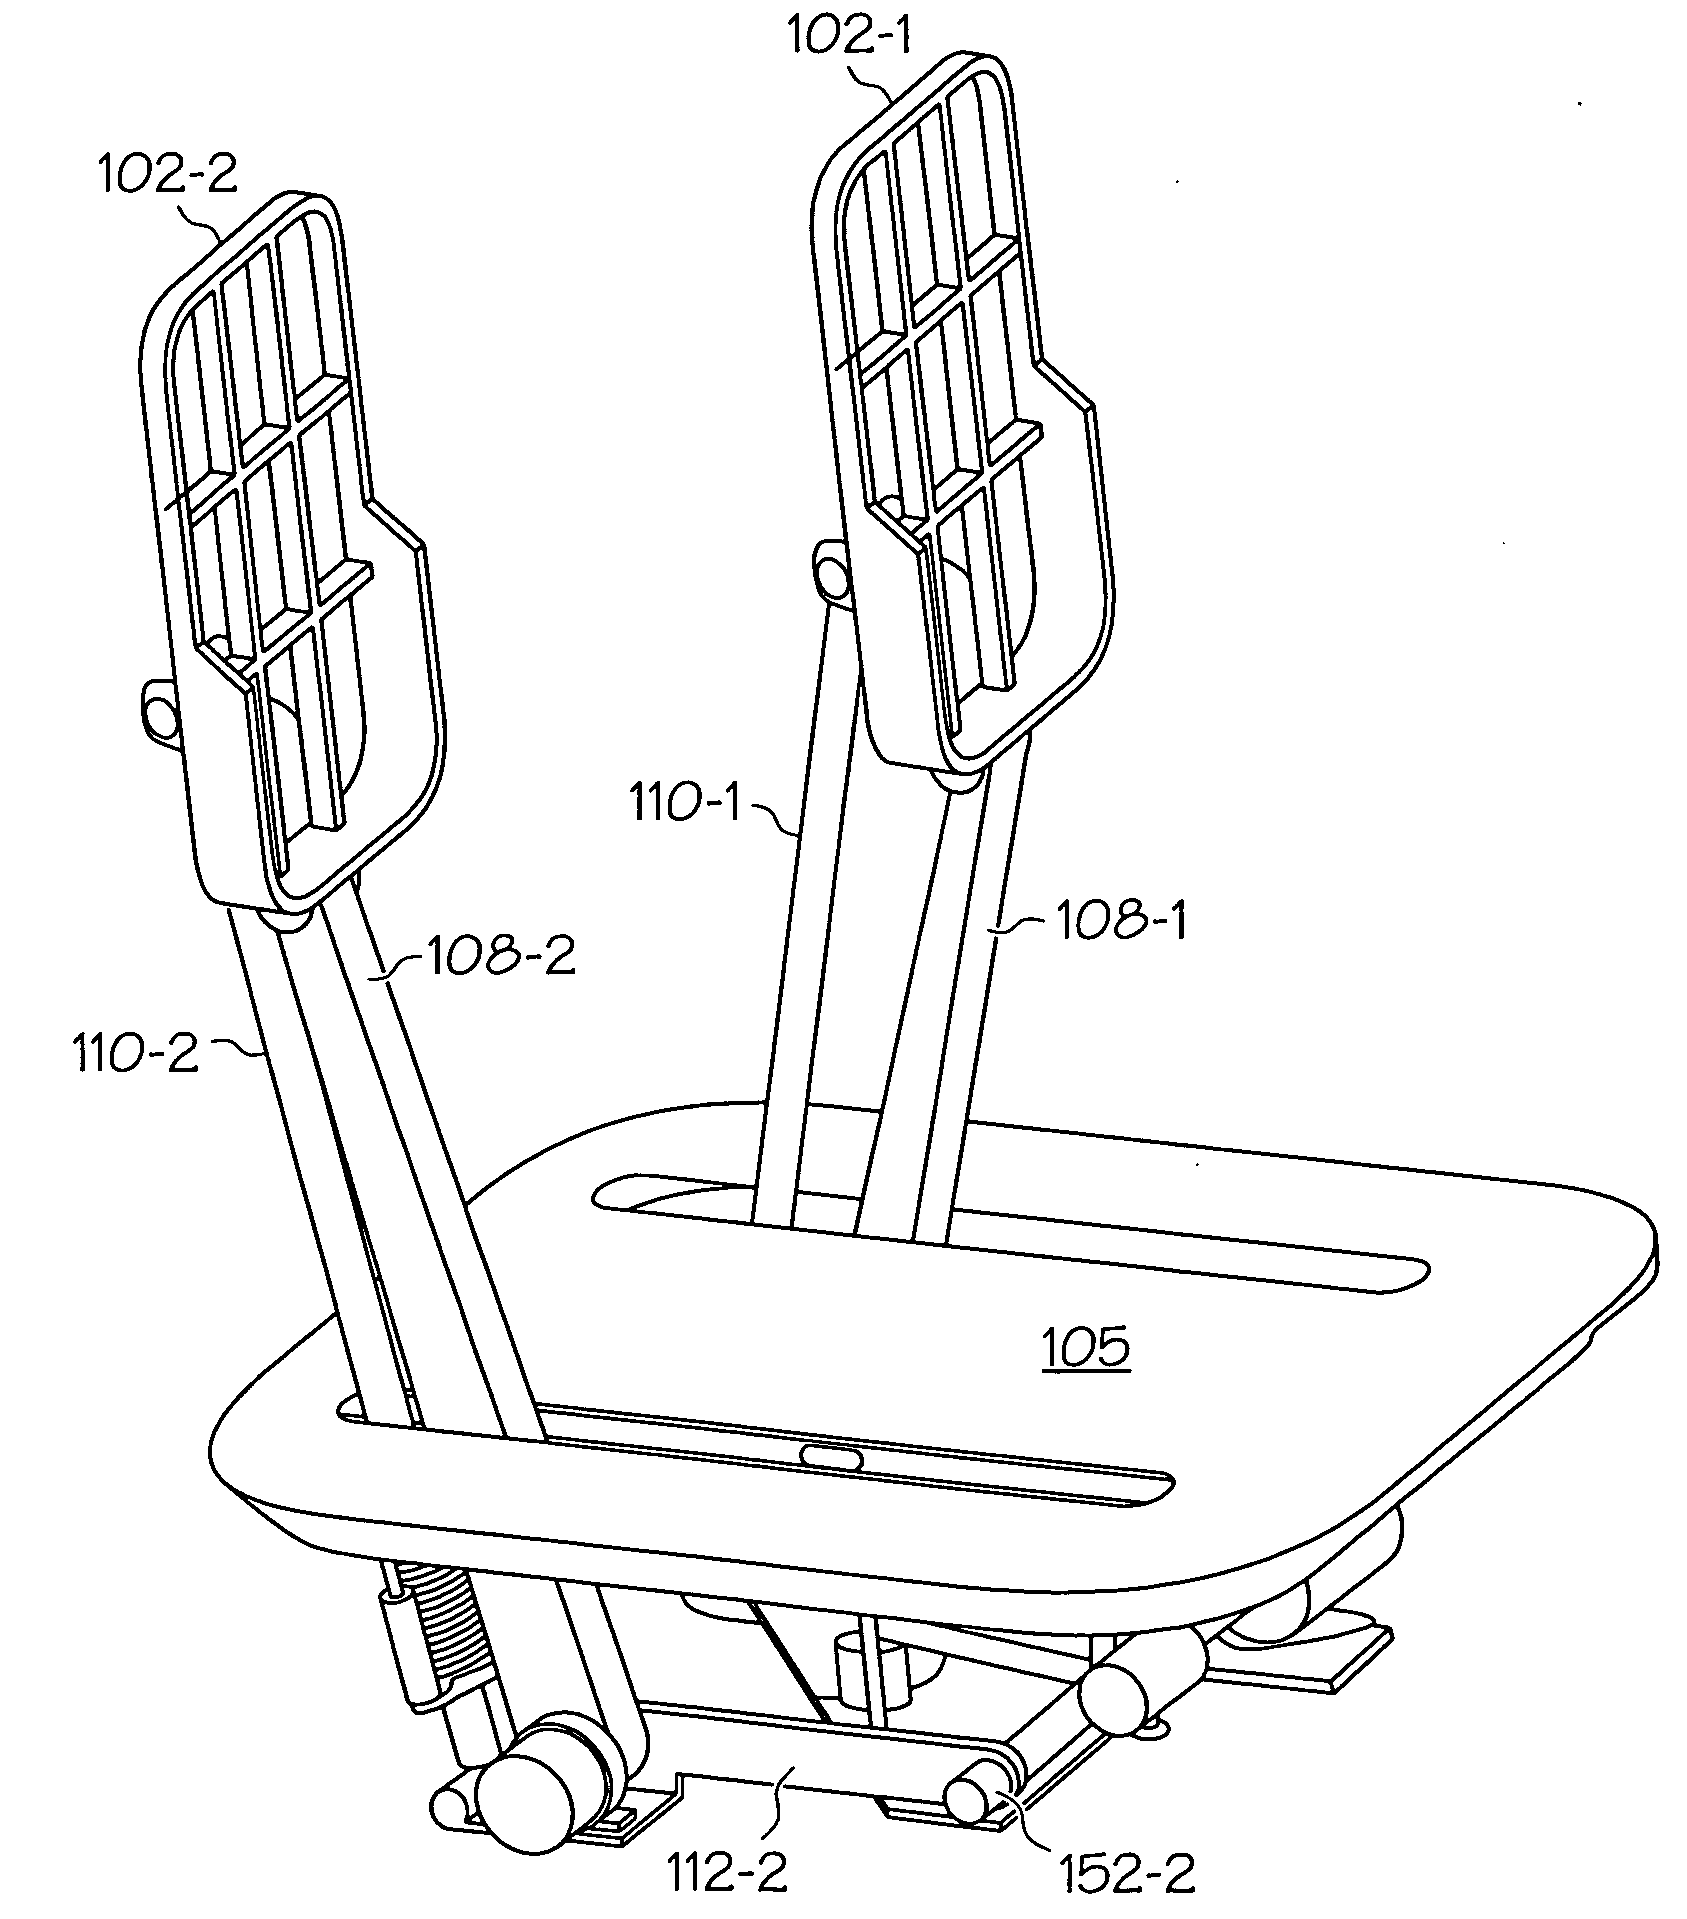 Active rudder pedal mechanism with foreign object strike tolerance and articulating brake